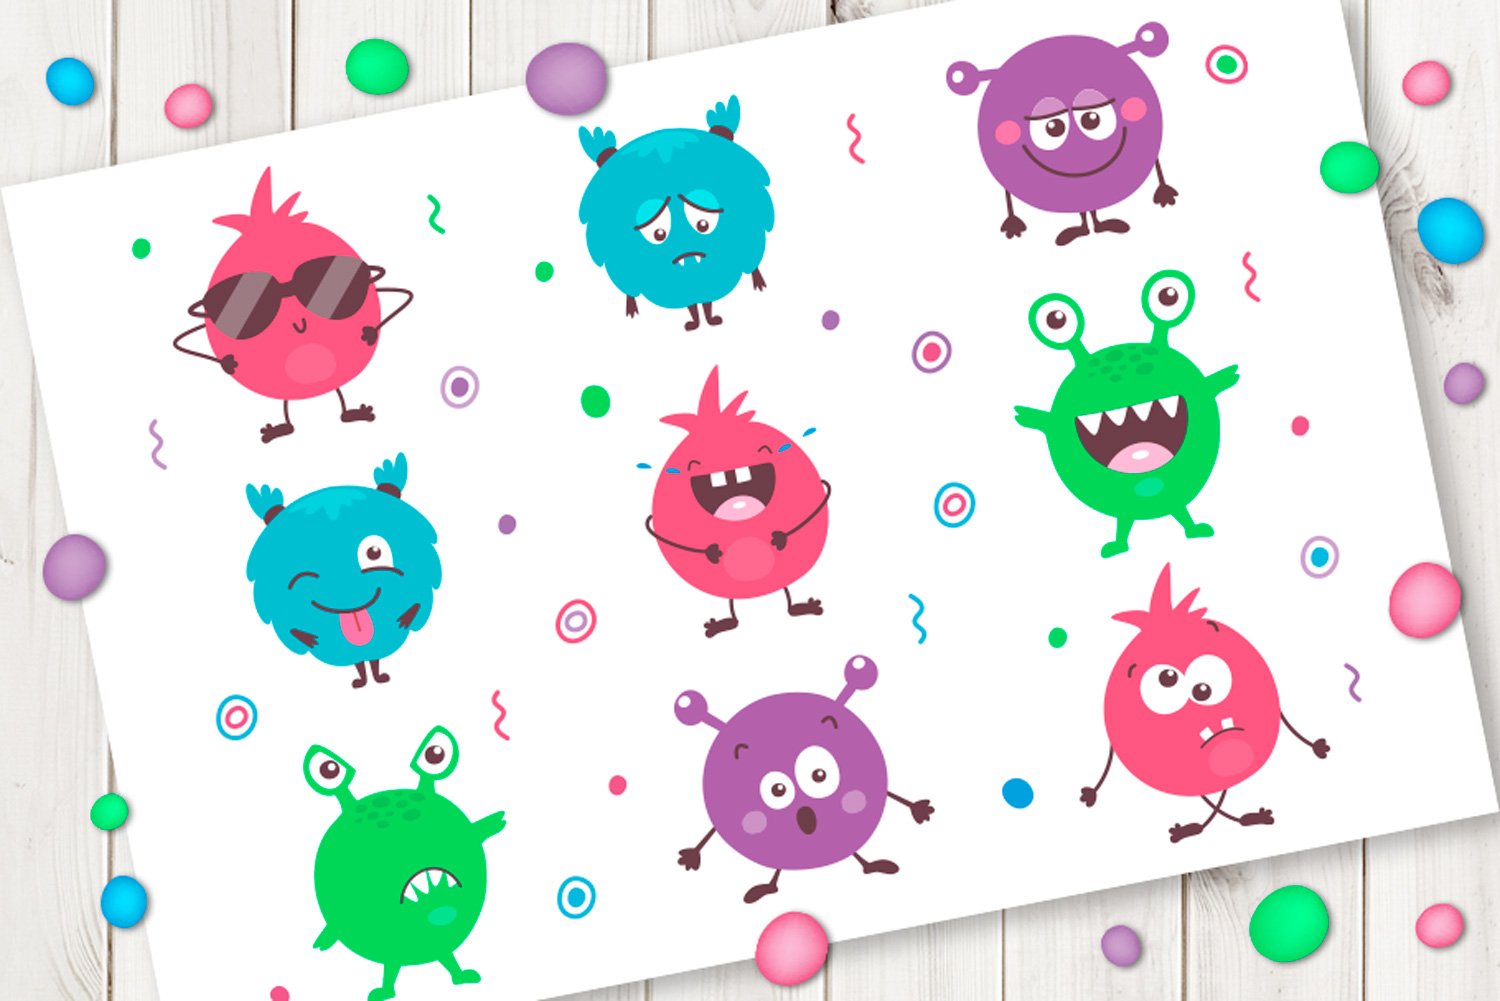 Cute cartoon monsters vector set cover image.